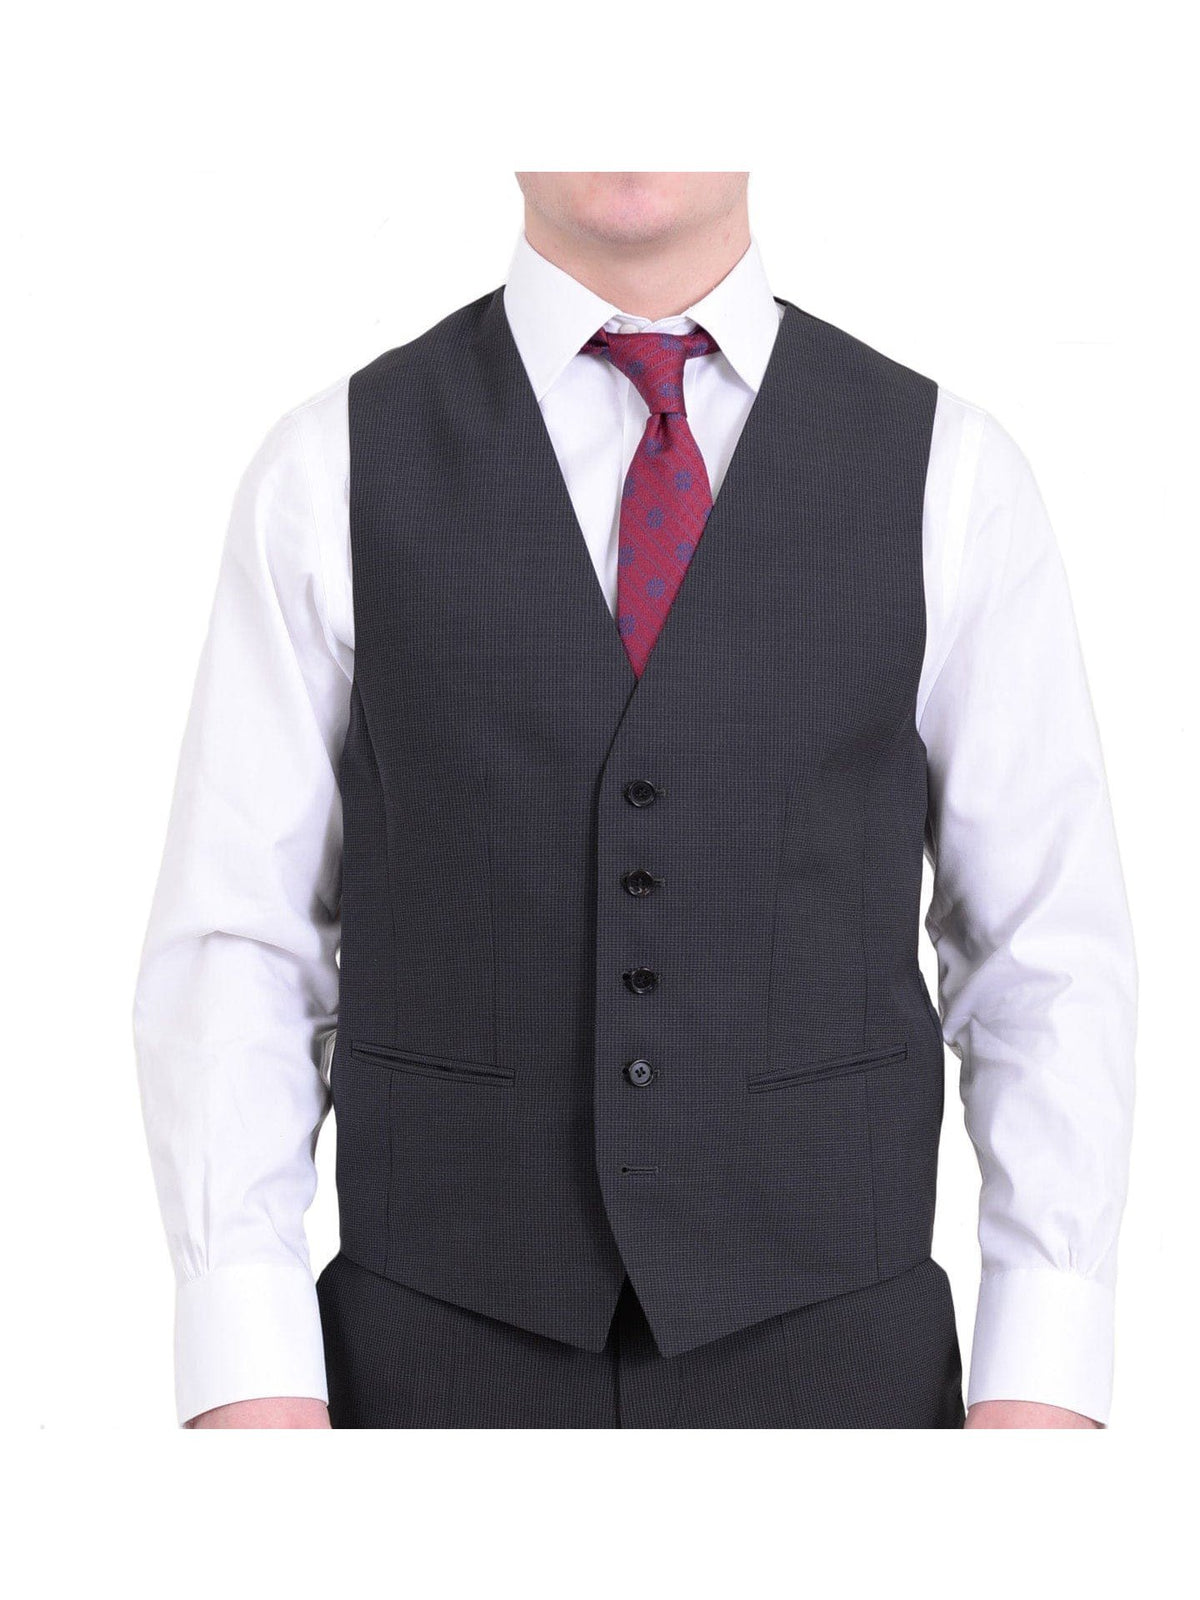 HUGO BOSS THREE PIECE SUITS Hugo Boss The Grand/central Gray Mini Check Two Button Three Piece Wool Suit